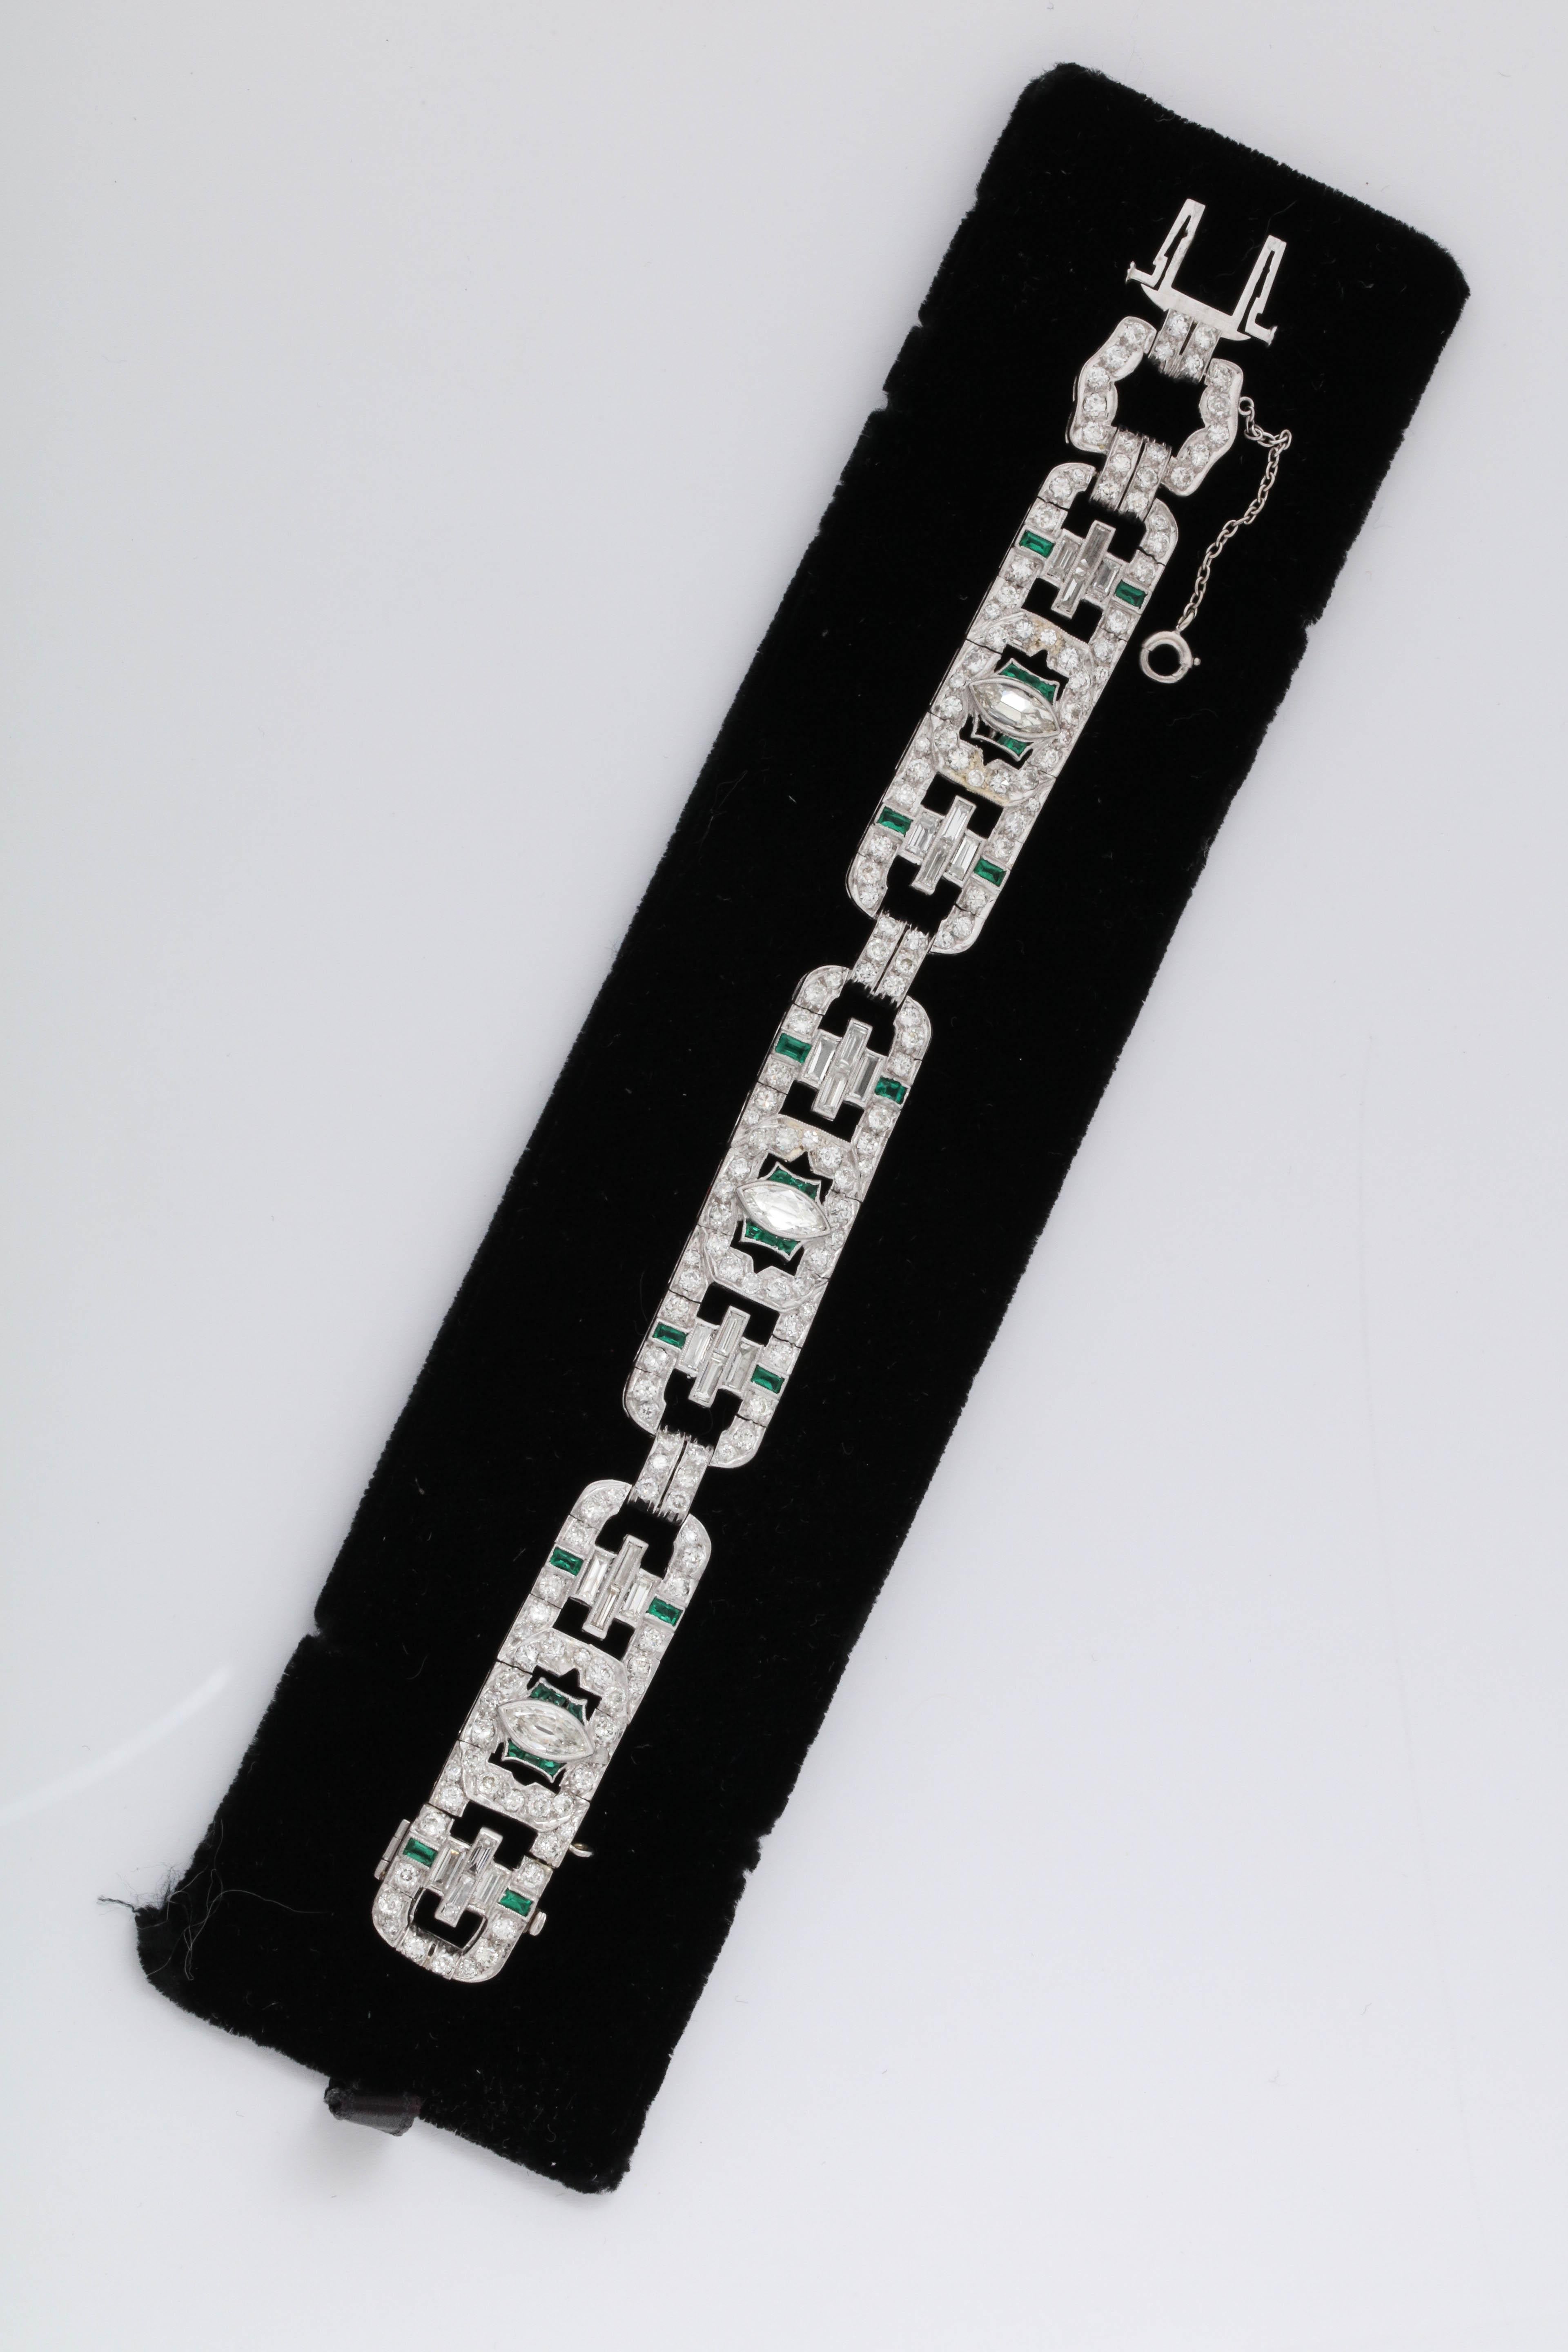 One Ladies Important Platinum Set Art Deco Bracelet Embellished With [24] Baguette Diamonds Weighing Approximately 3 Carats Total Weight. This Flexible Open Link Bracelet Is Further Embellished With Numerous Old European And Old Mine Cut Diamonds